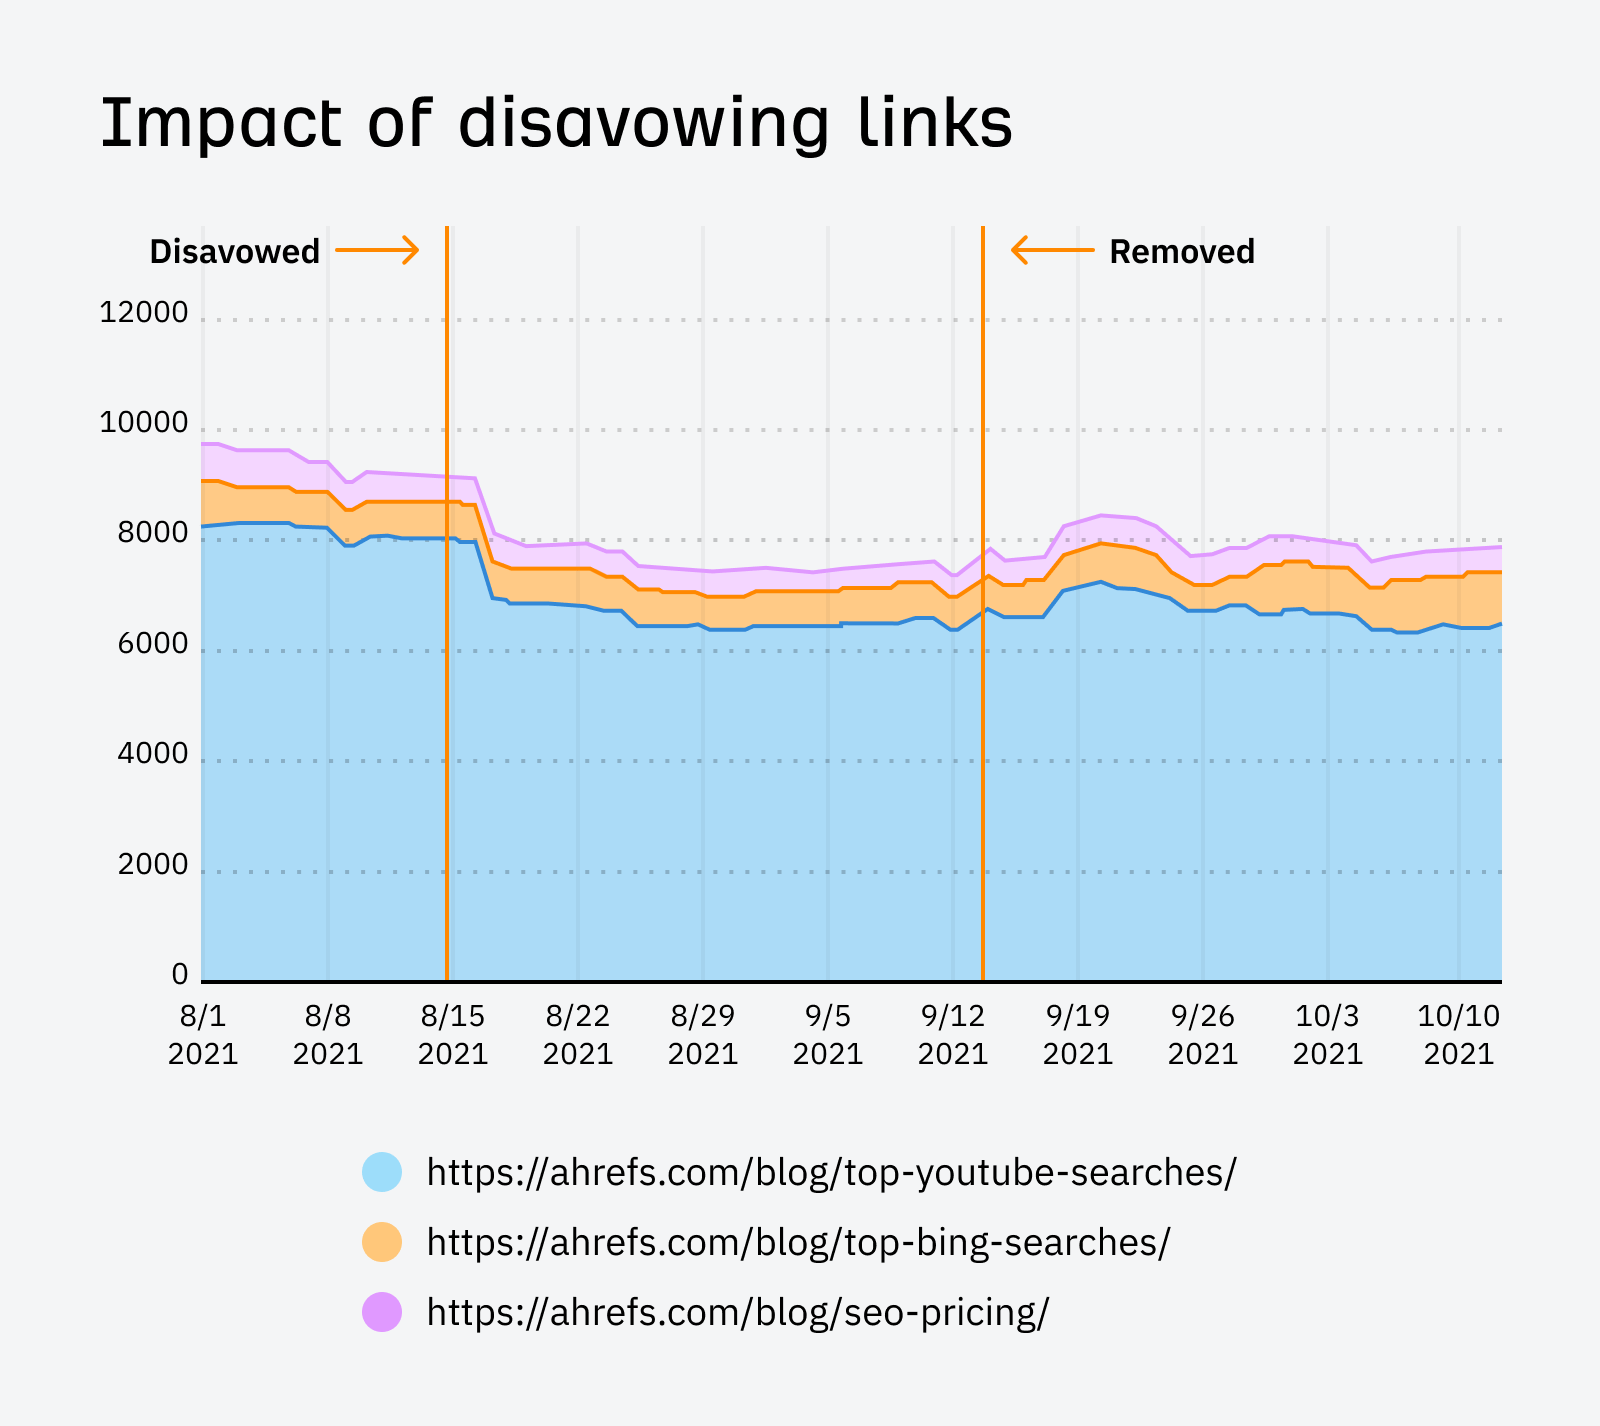 impact-of-disavowing-links-study-by-ahrefs How Do You Explain the Value of SEO? I Asked 100 Experts